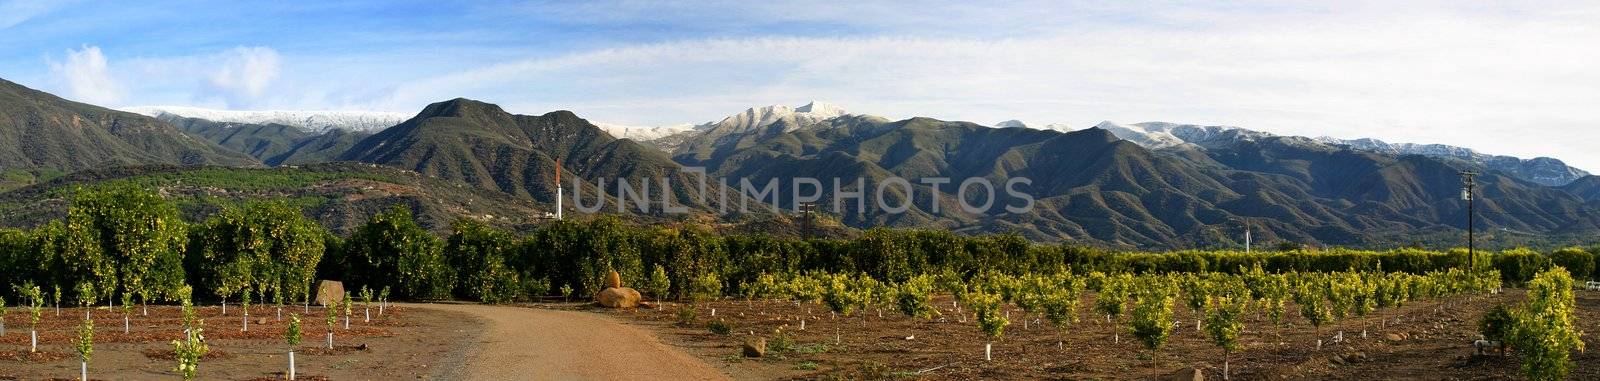 Ojai Valley With Snow(PIII) by hlehnerer